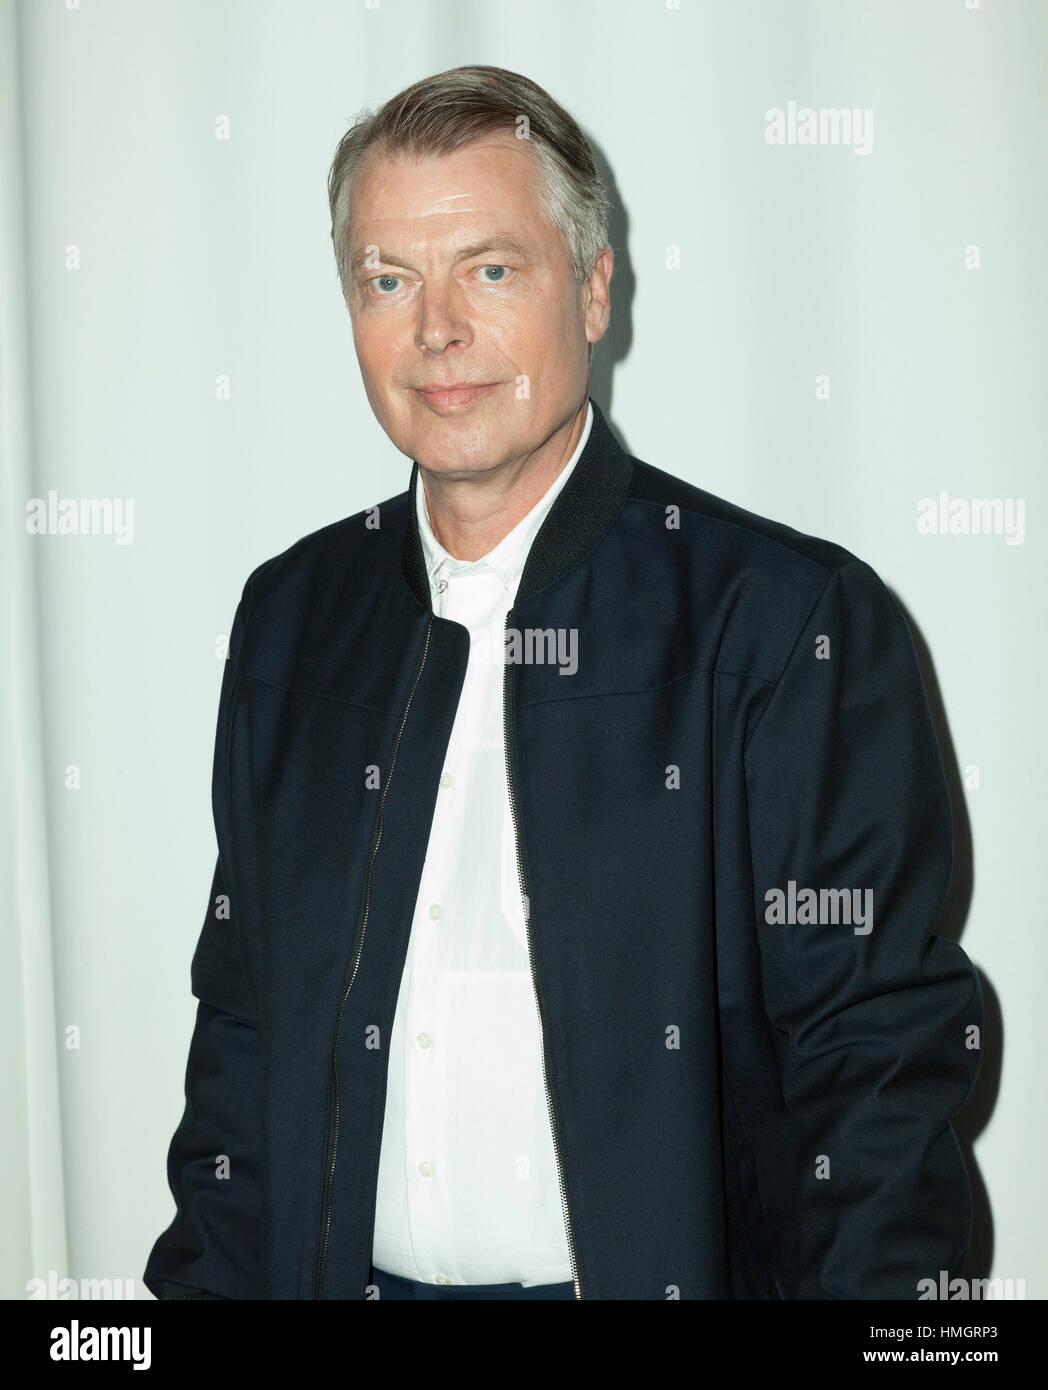 New York, NY USA - February 1, 2017: Richard Johnson attends the blue jacket fashon show in support for prostate cancer awarness during New York Fashion week at Pier 59 Stock Photo